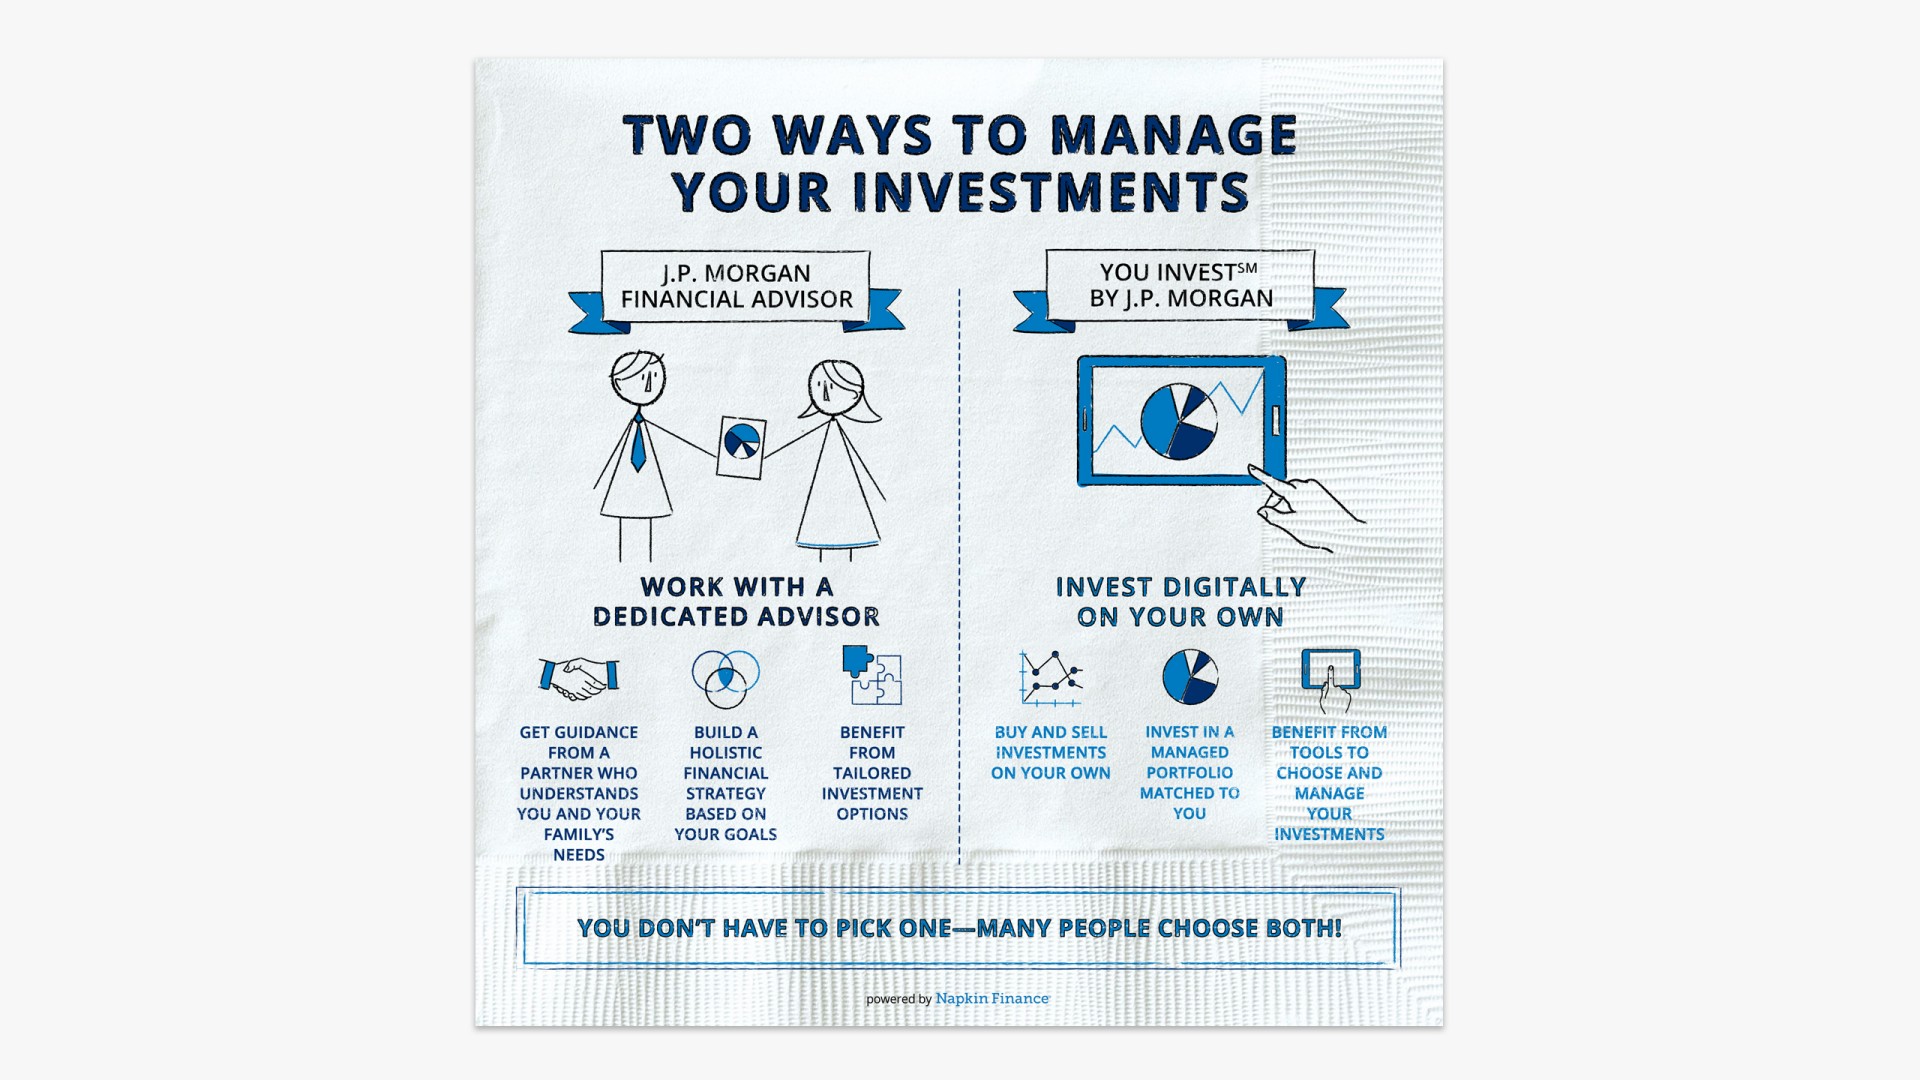 Partner With An Advisor Or Invest Digitally Learning And Insights Chase Com